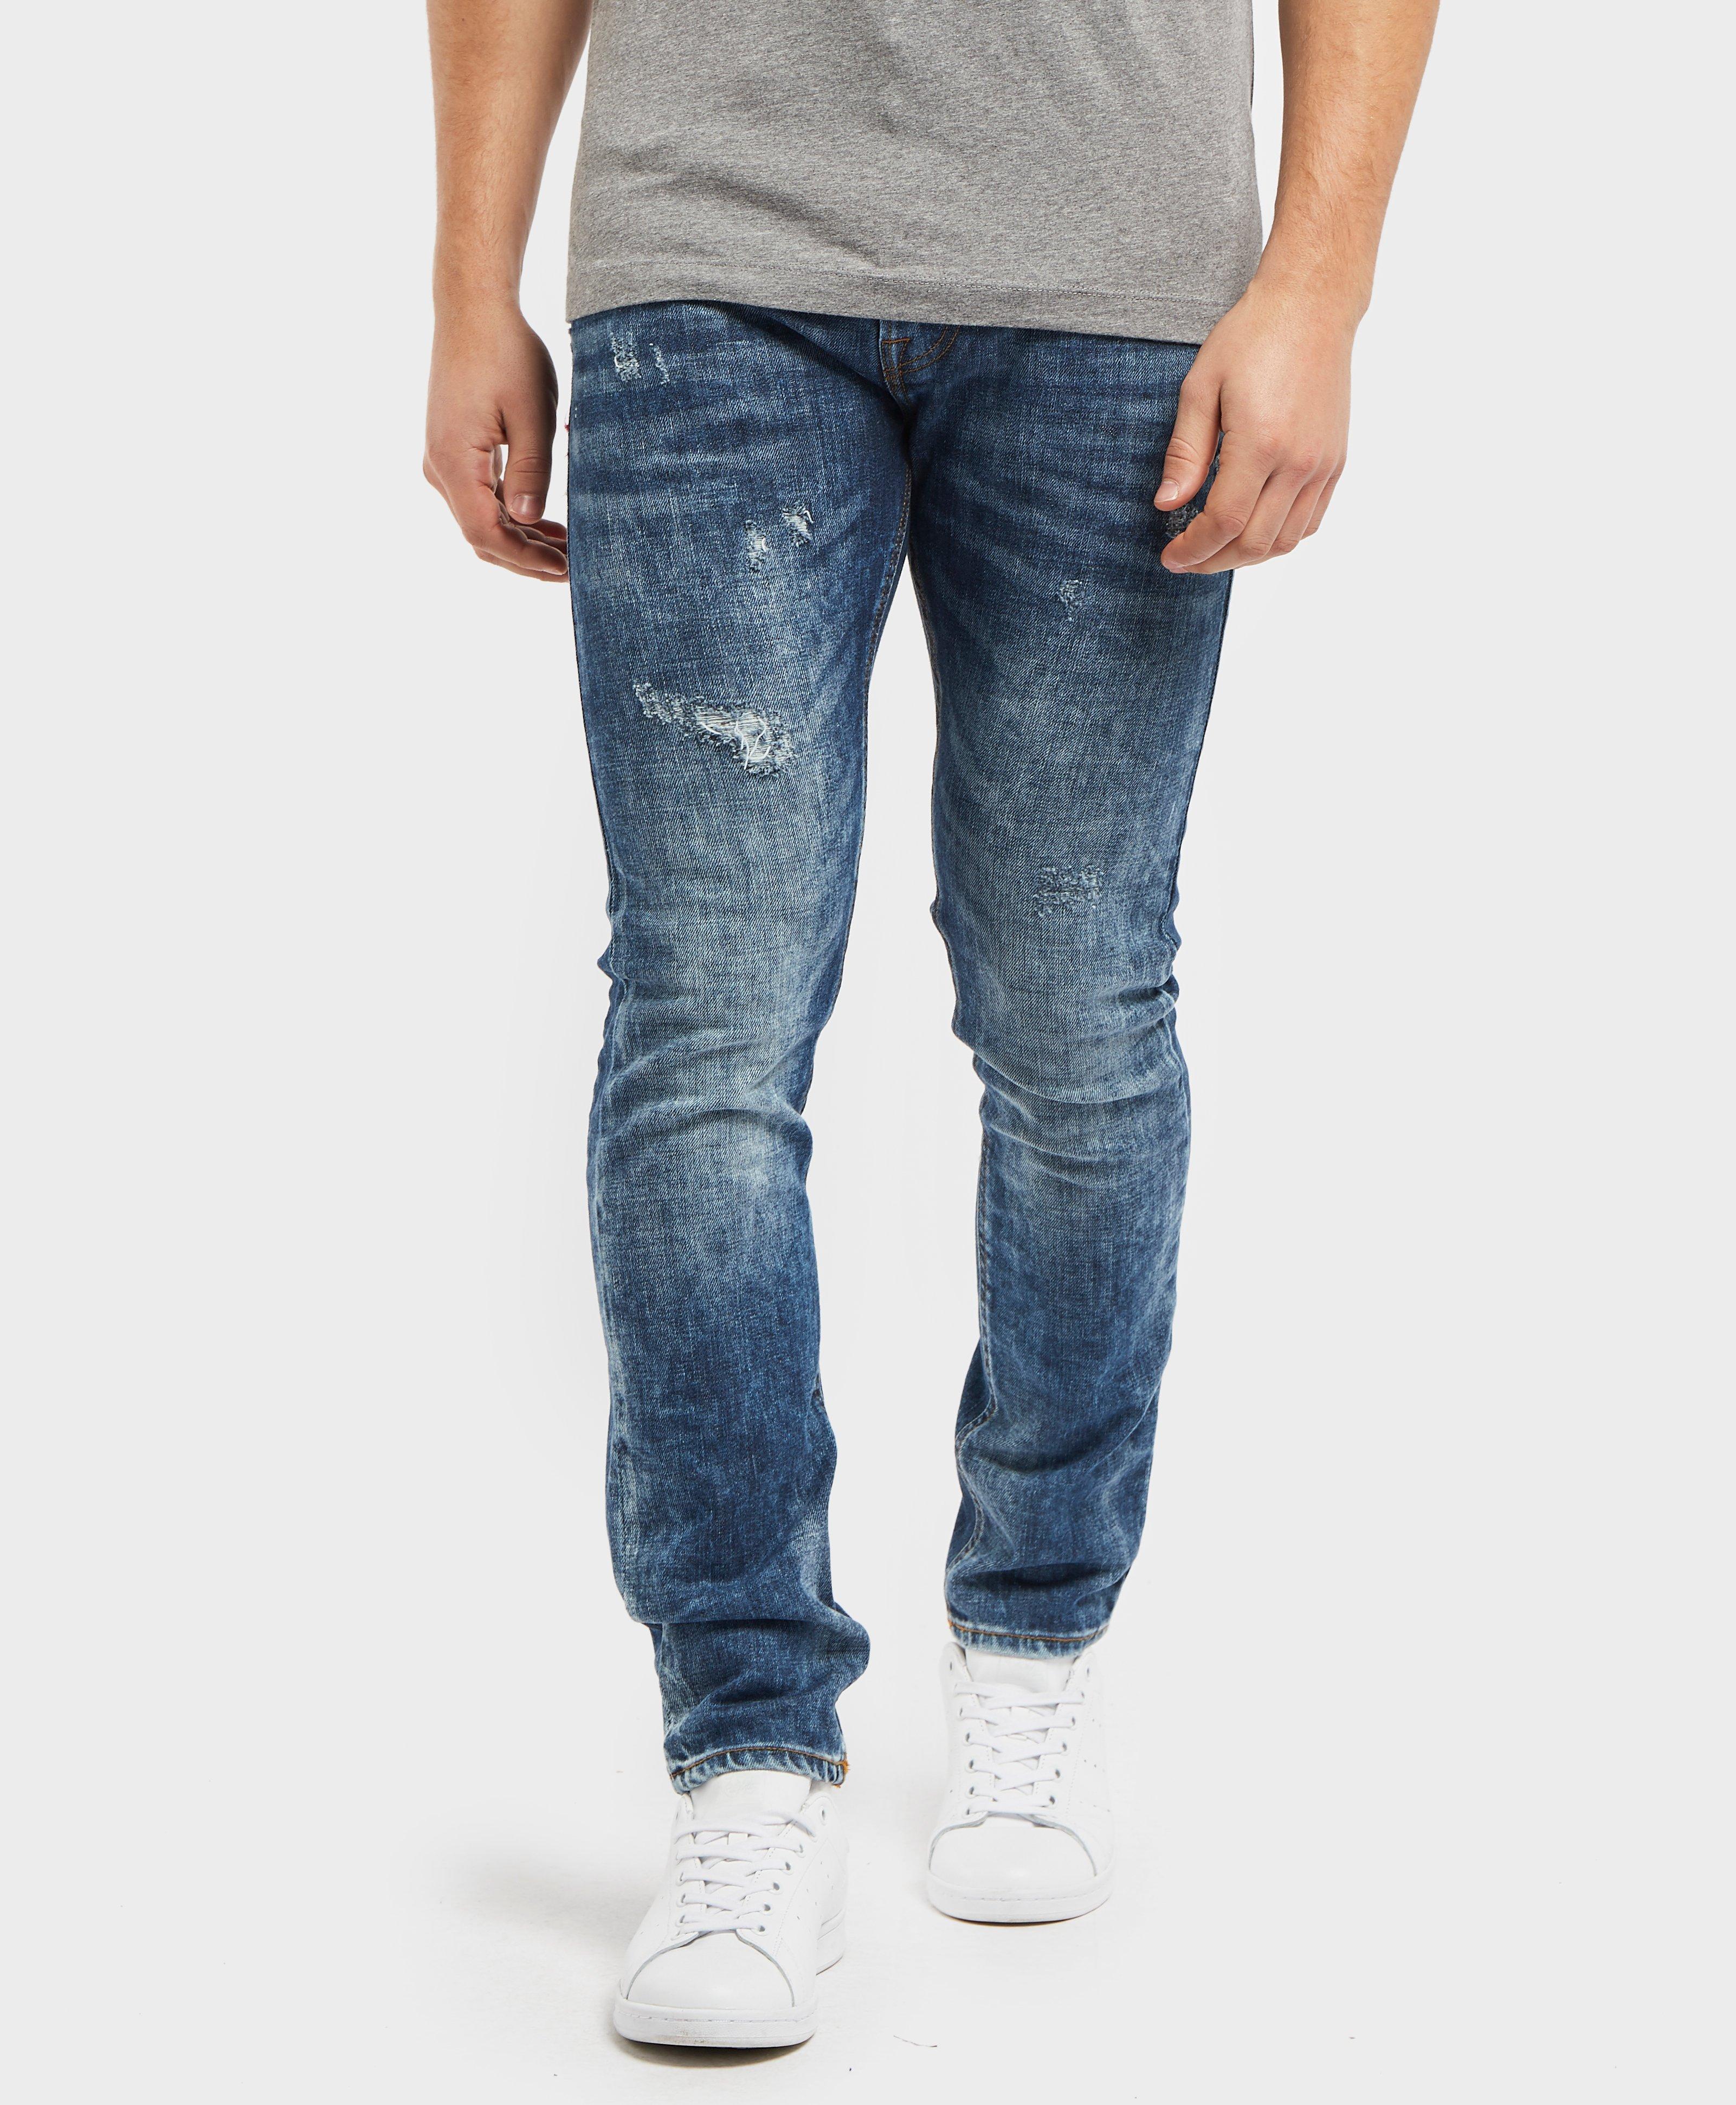 Guess Denim Miami Skinny Ripped Jeans In Blue For Men Lyst